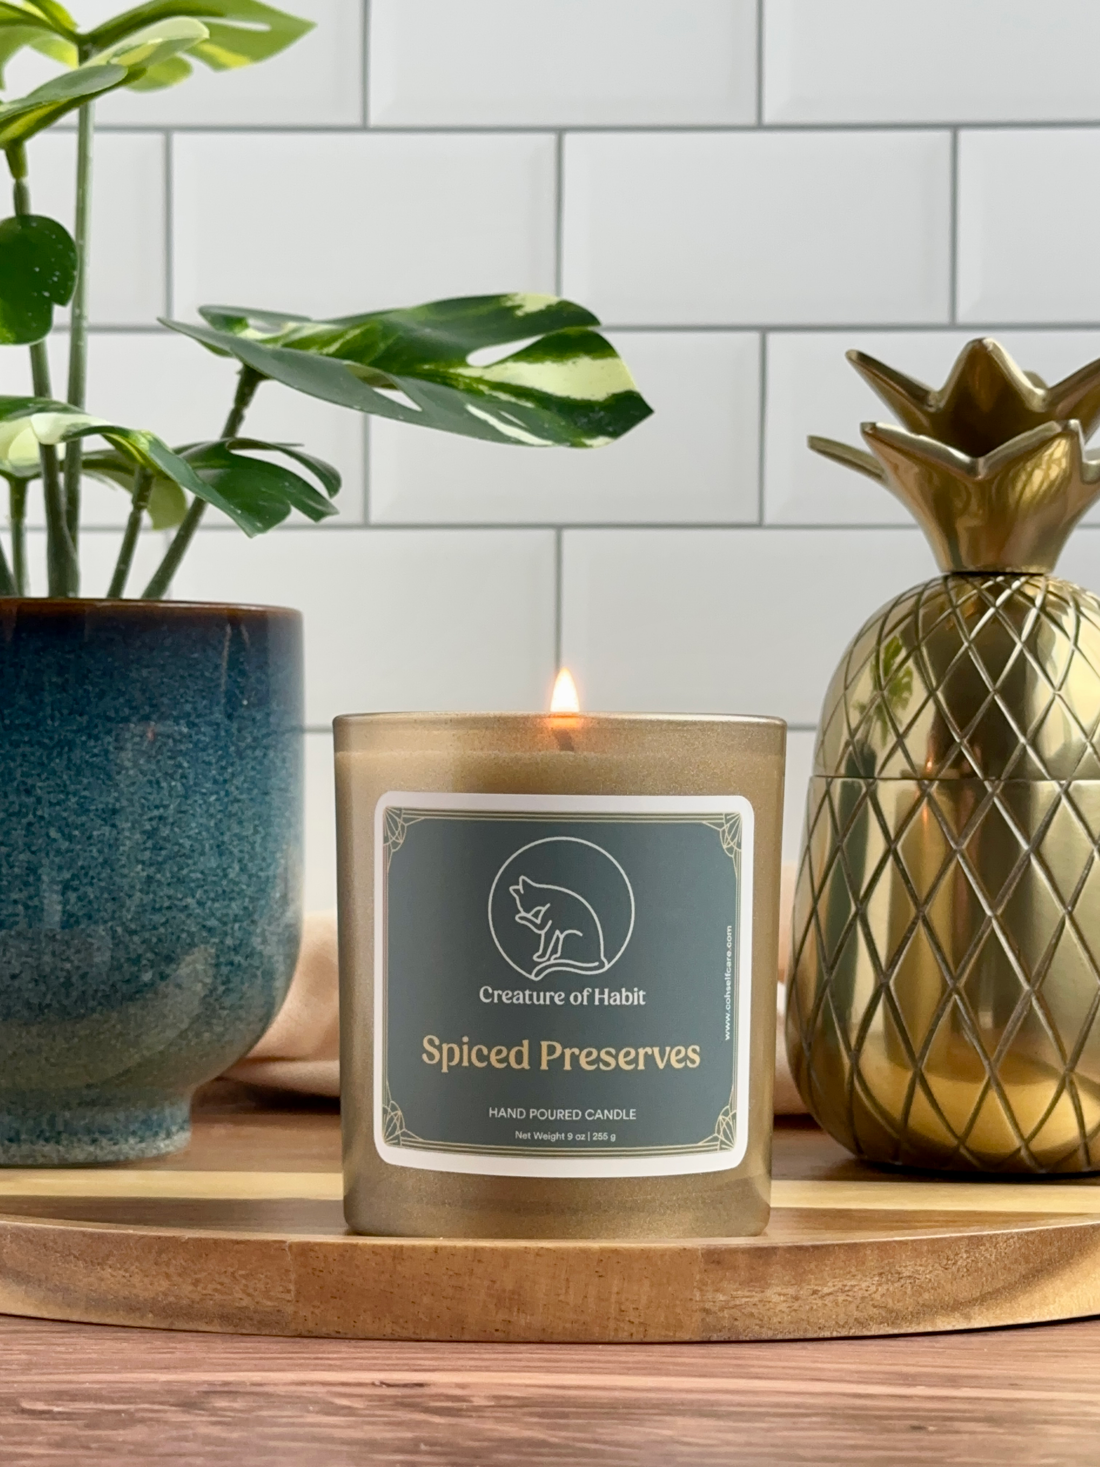 A lit soy candle within a golden vessel is placed on top of a wooden tray, next to a small houseplant and golden pineapple paperweight. The label is greyish cyan featuring the logo of a white cat silhouette, the name of the company Creature of Habit, and the scent name Spiced Preserves.